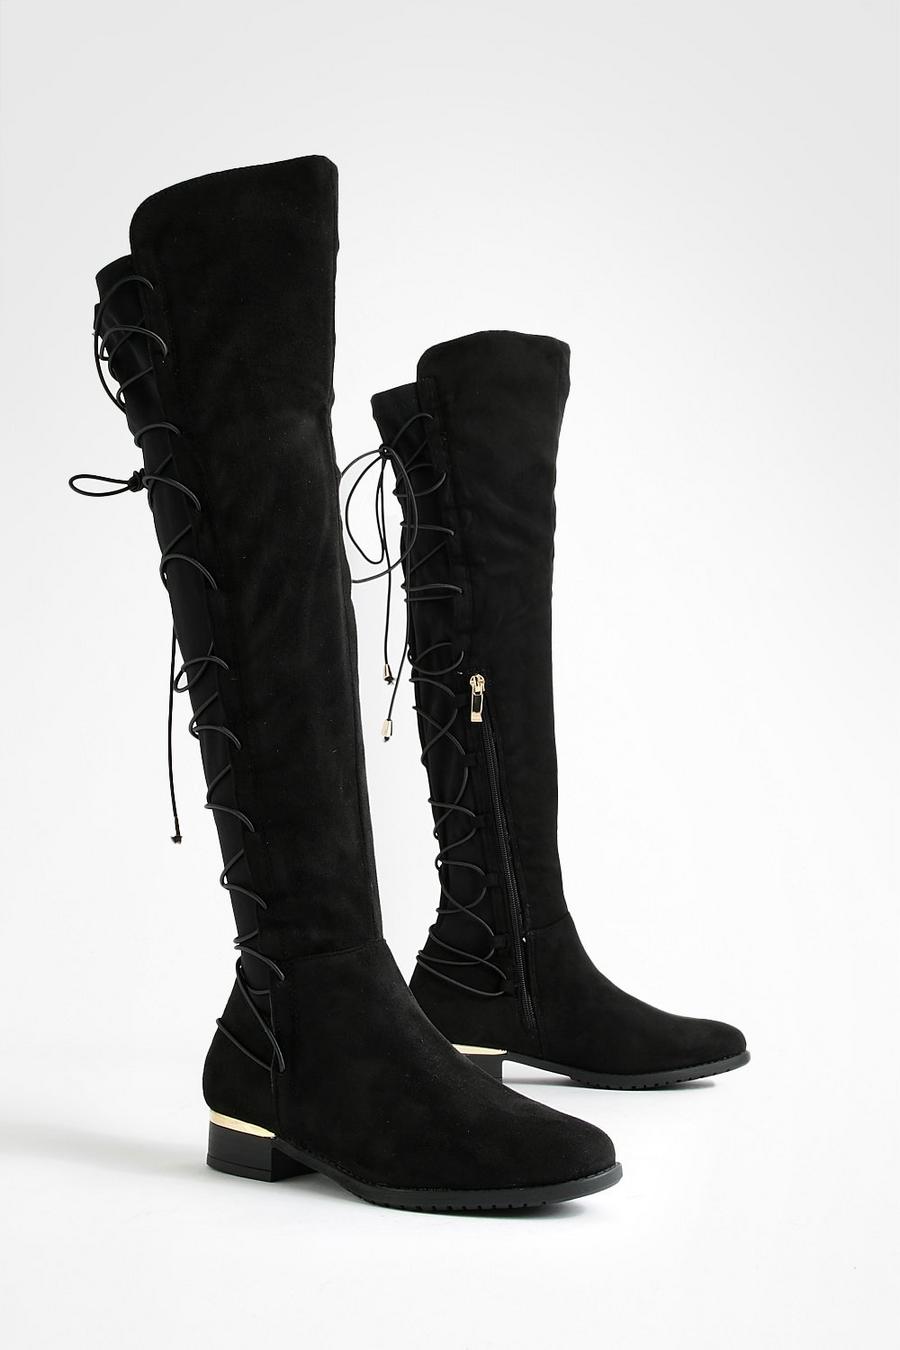 Bungee Lace Back Knee High Boots |